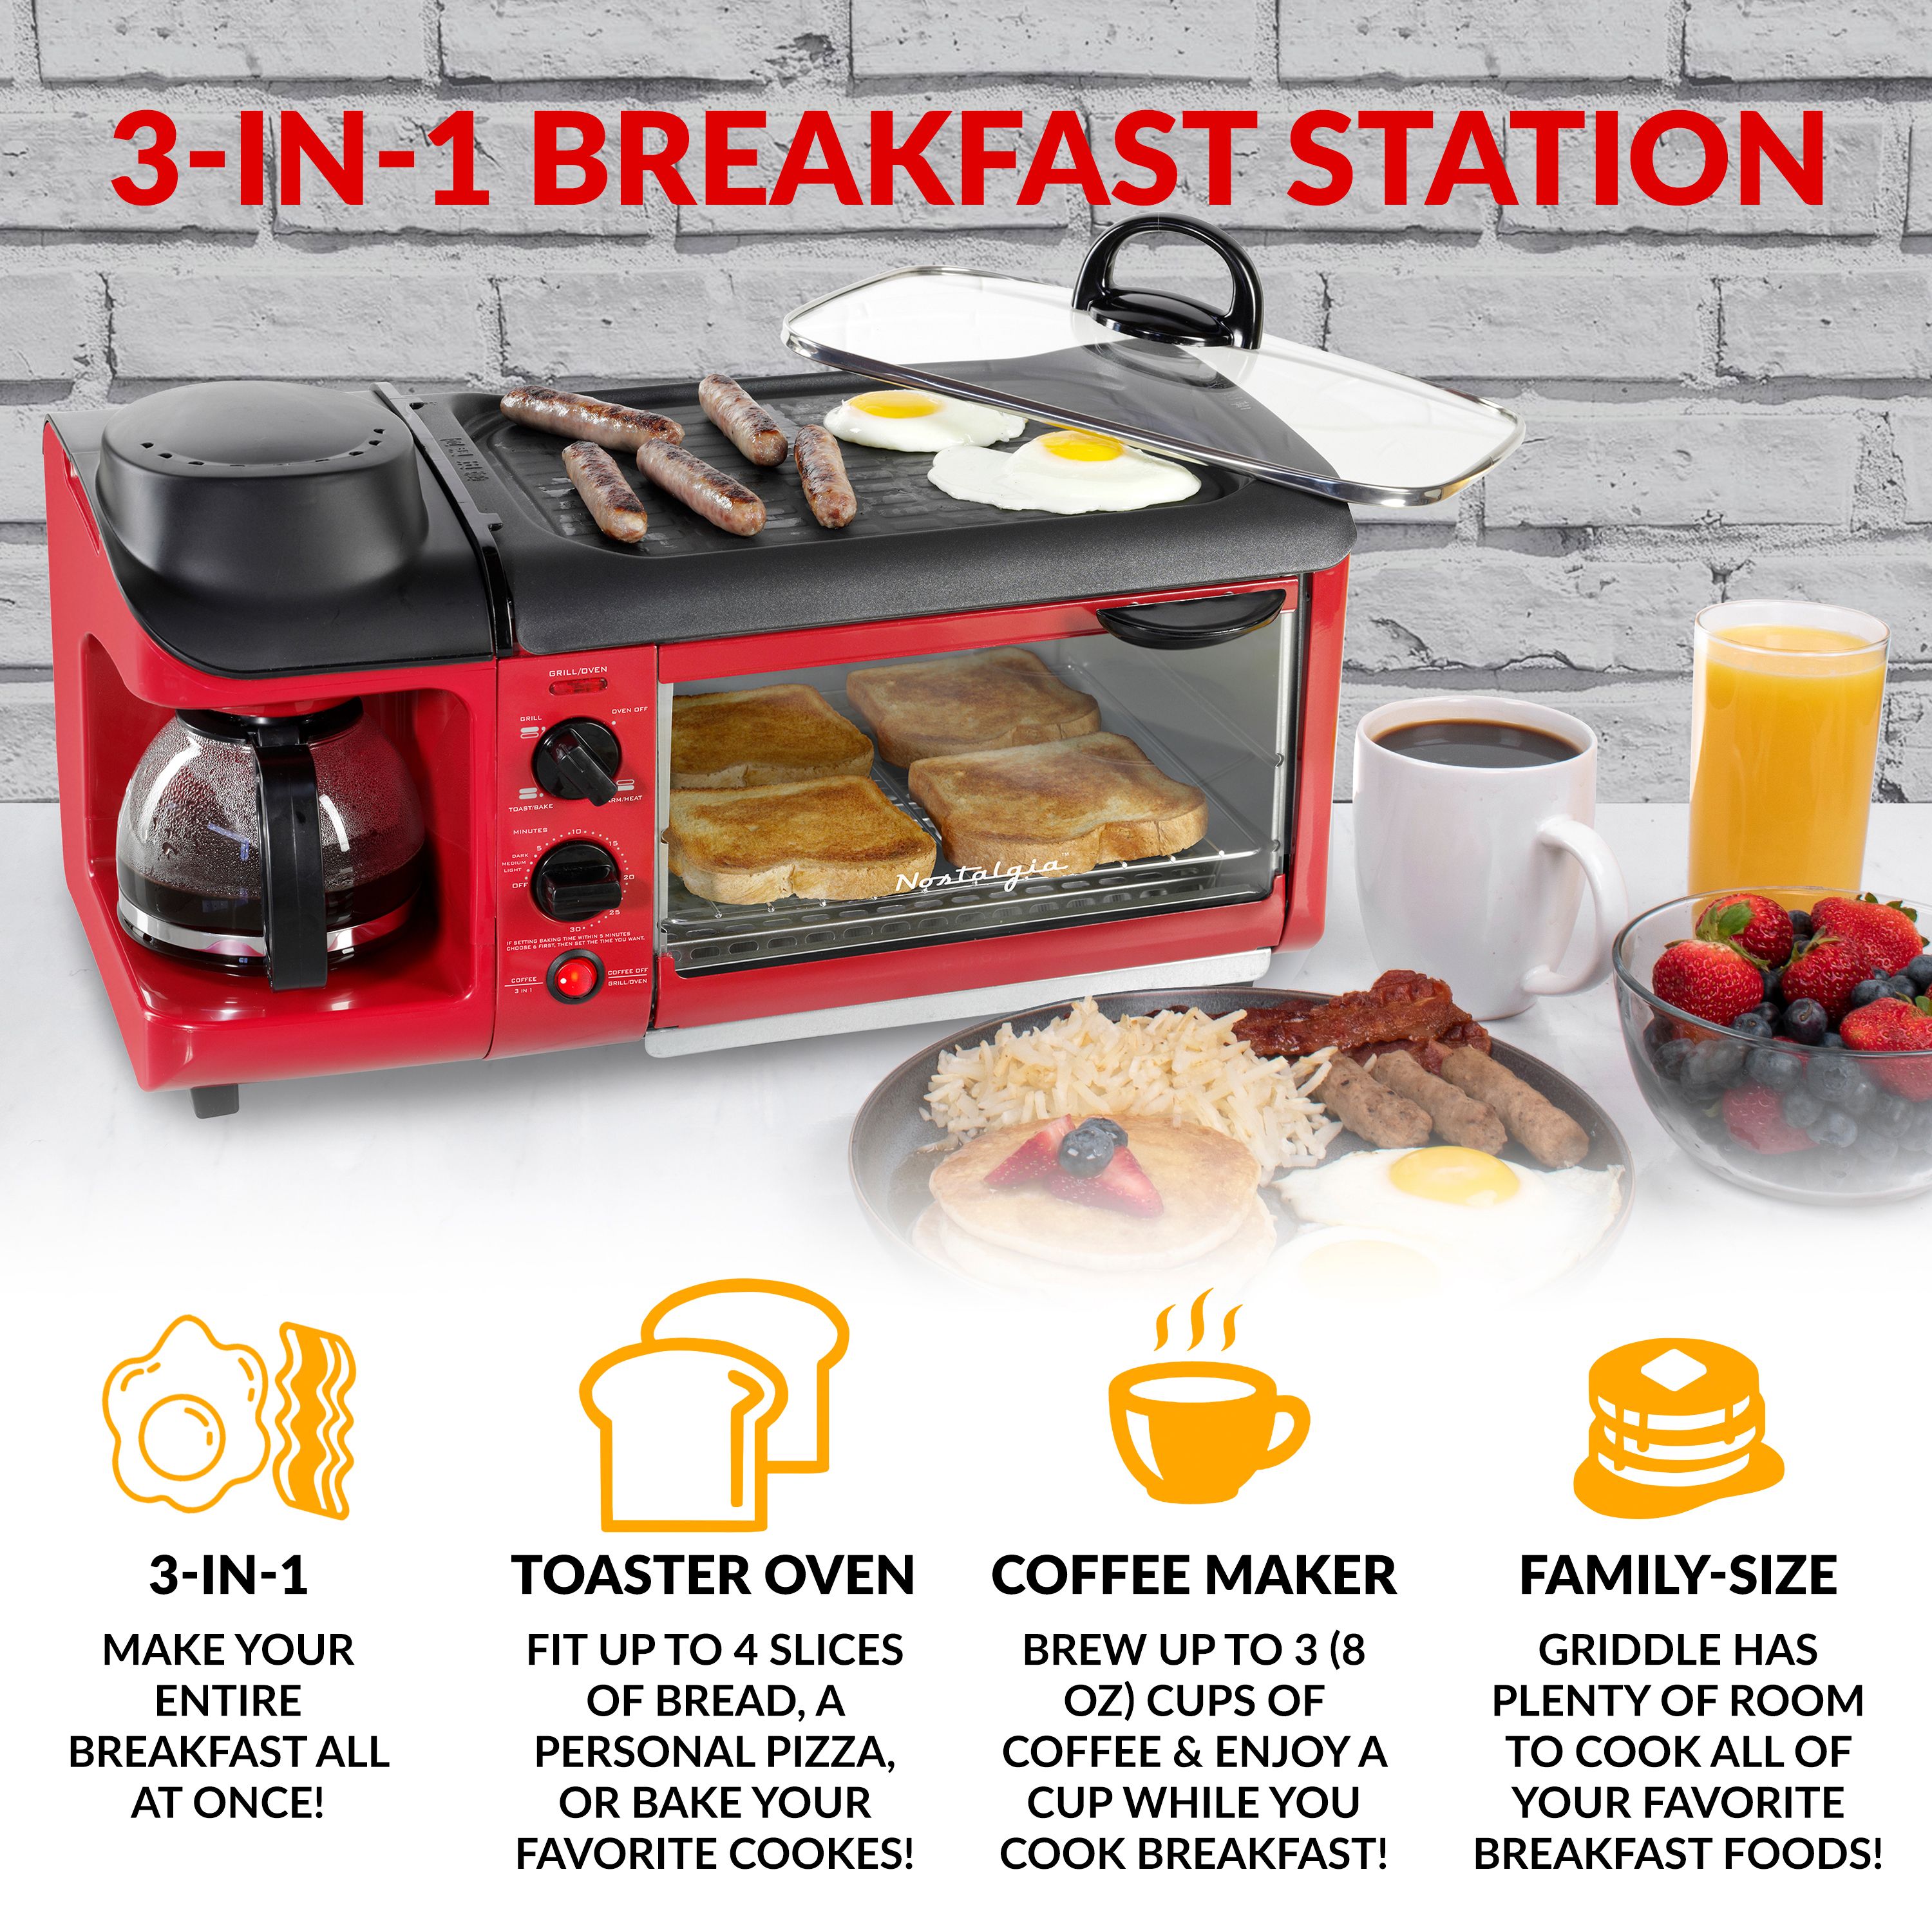 Nostalgia BST3RR Retro 3-in-1 Family Size Electric Breakfast Station, Coffeemaker, Griddle, Toaster Oven - Retro Red - image 2 of 7